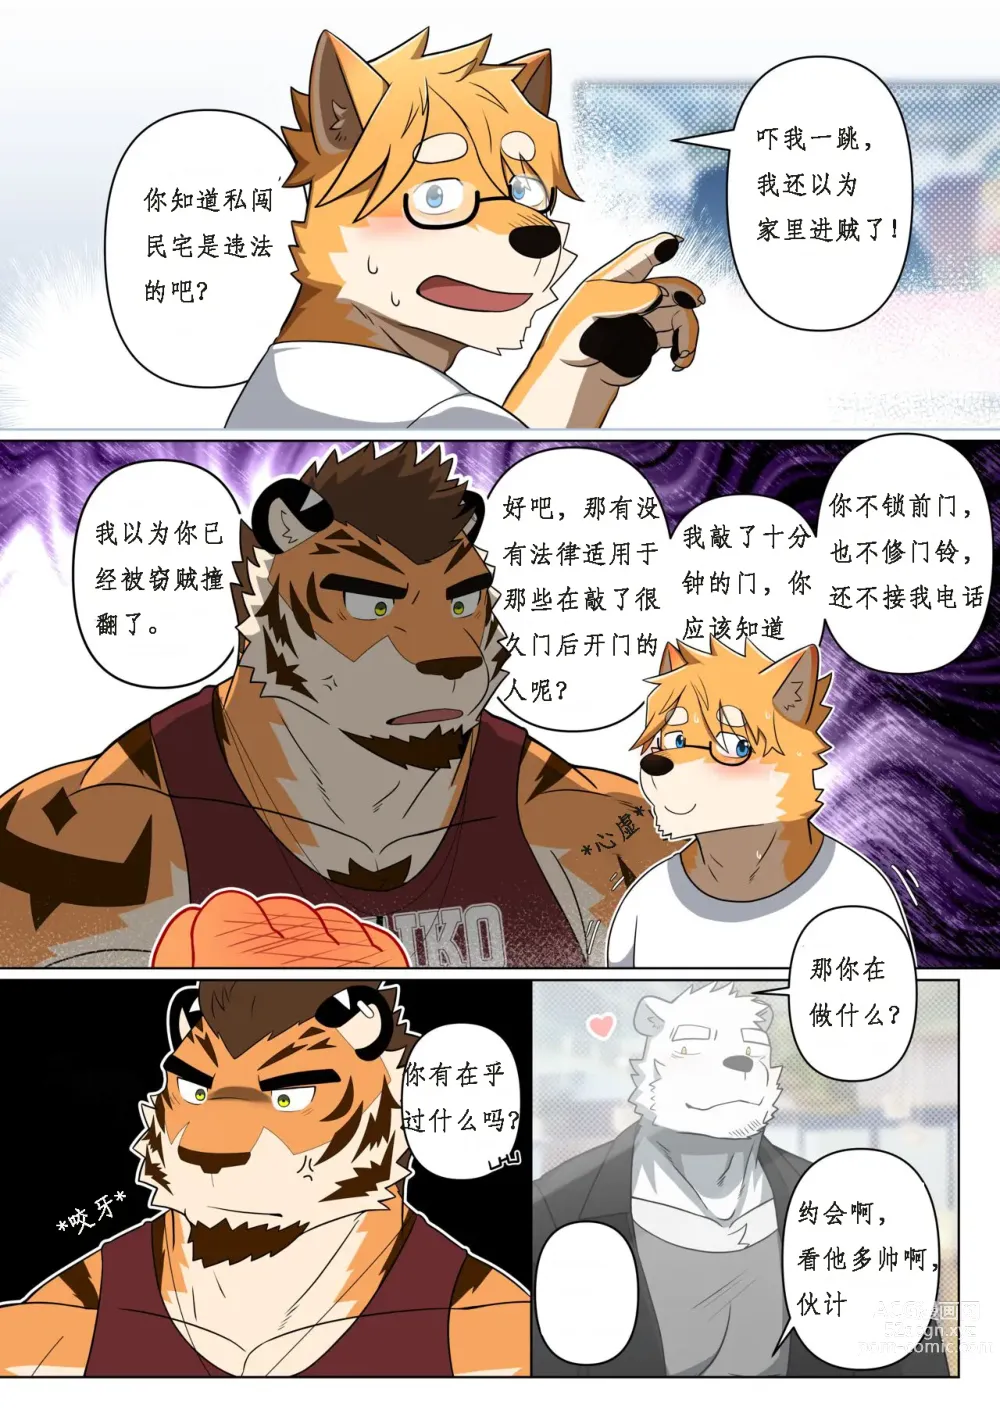 Page 11 of doujinshi 甜蜜陷阱 [Chinese］(Ongoing)【工口译制】